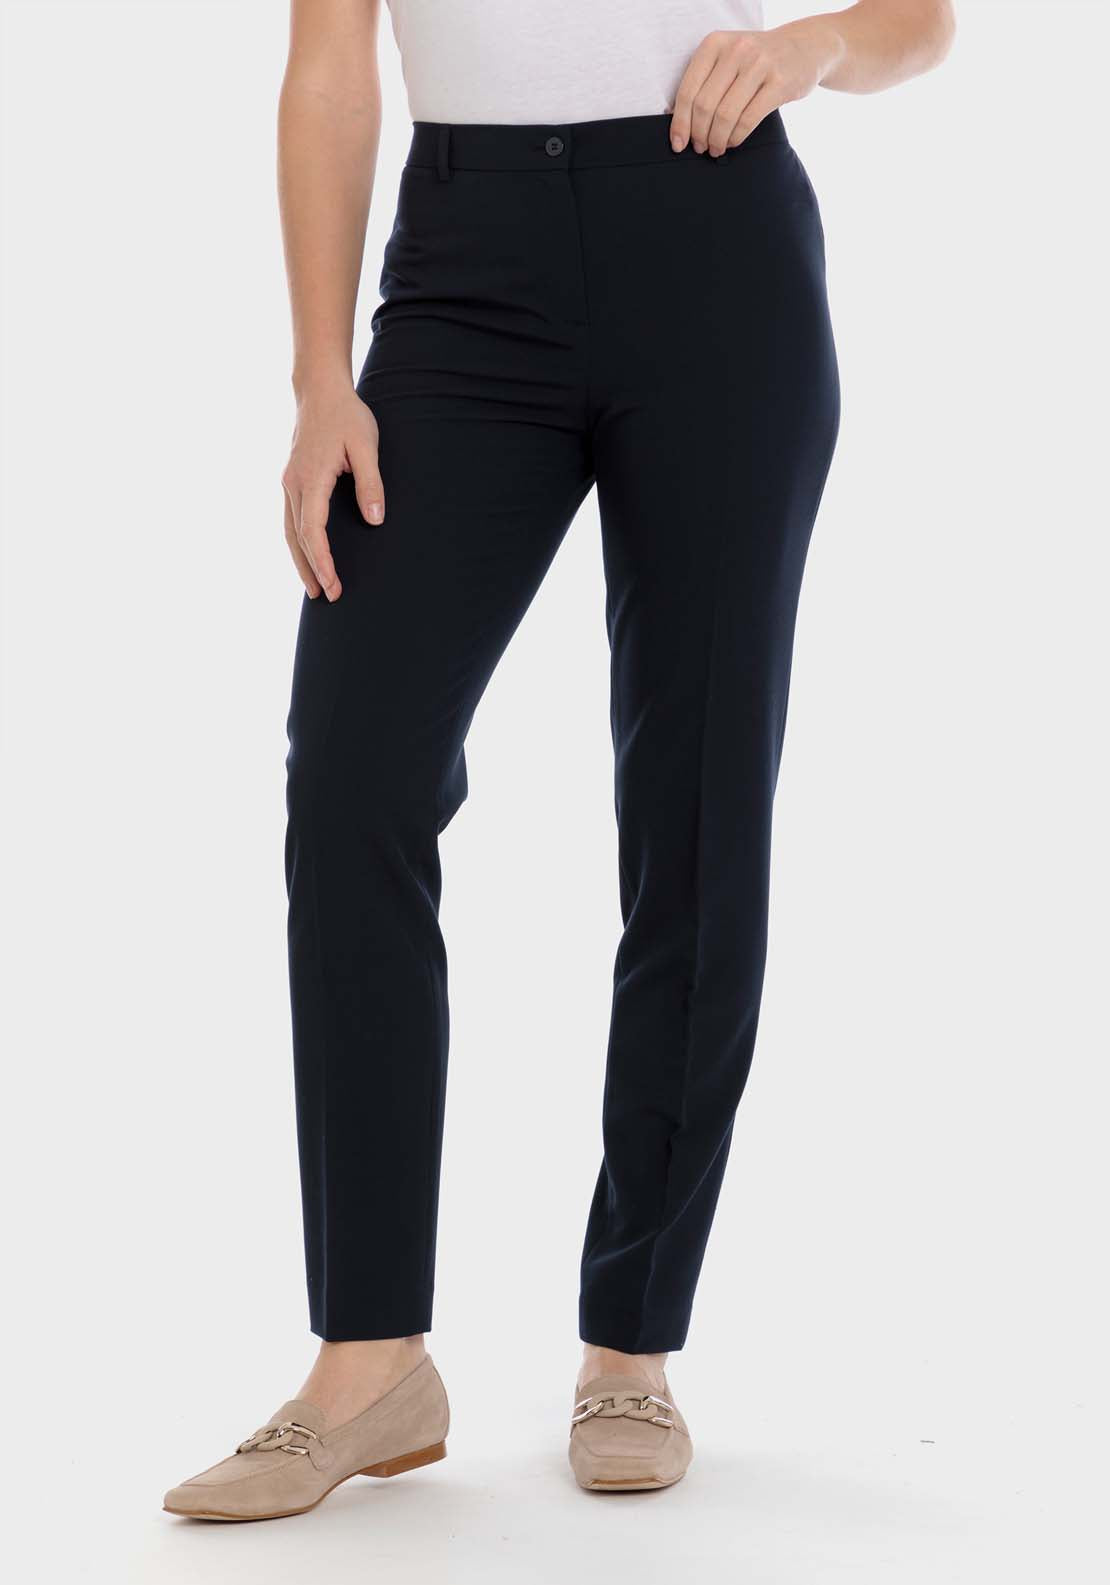 Punt Roma Viscose Trousers - Navy 1 Shaws Department Stores